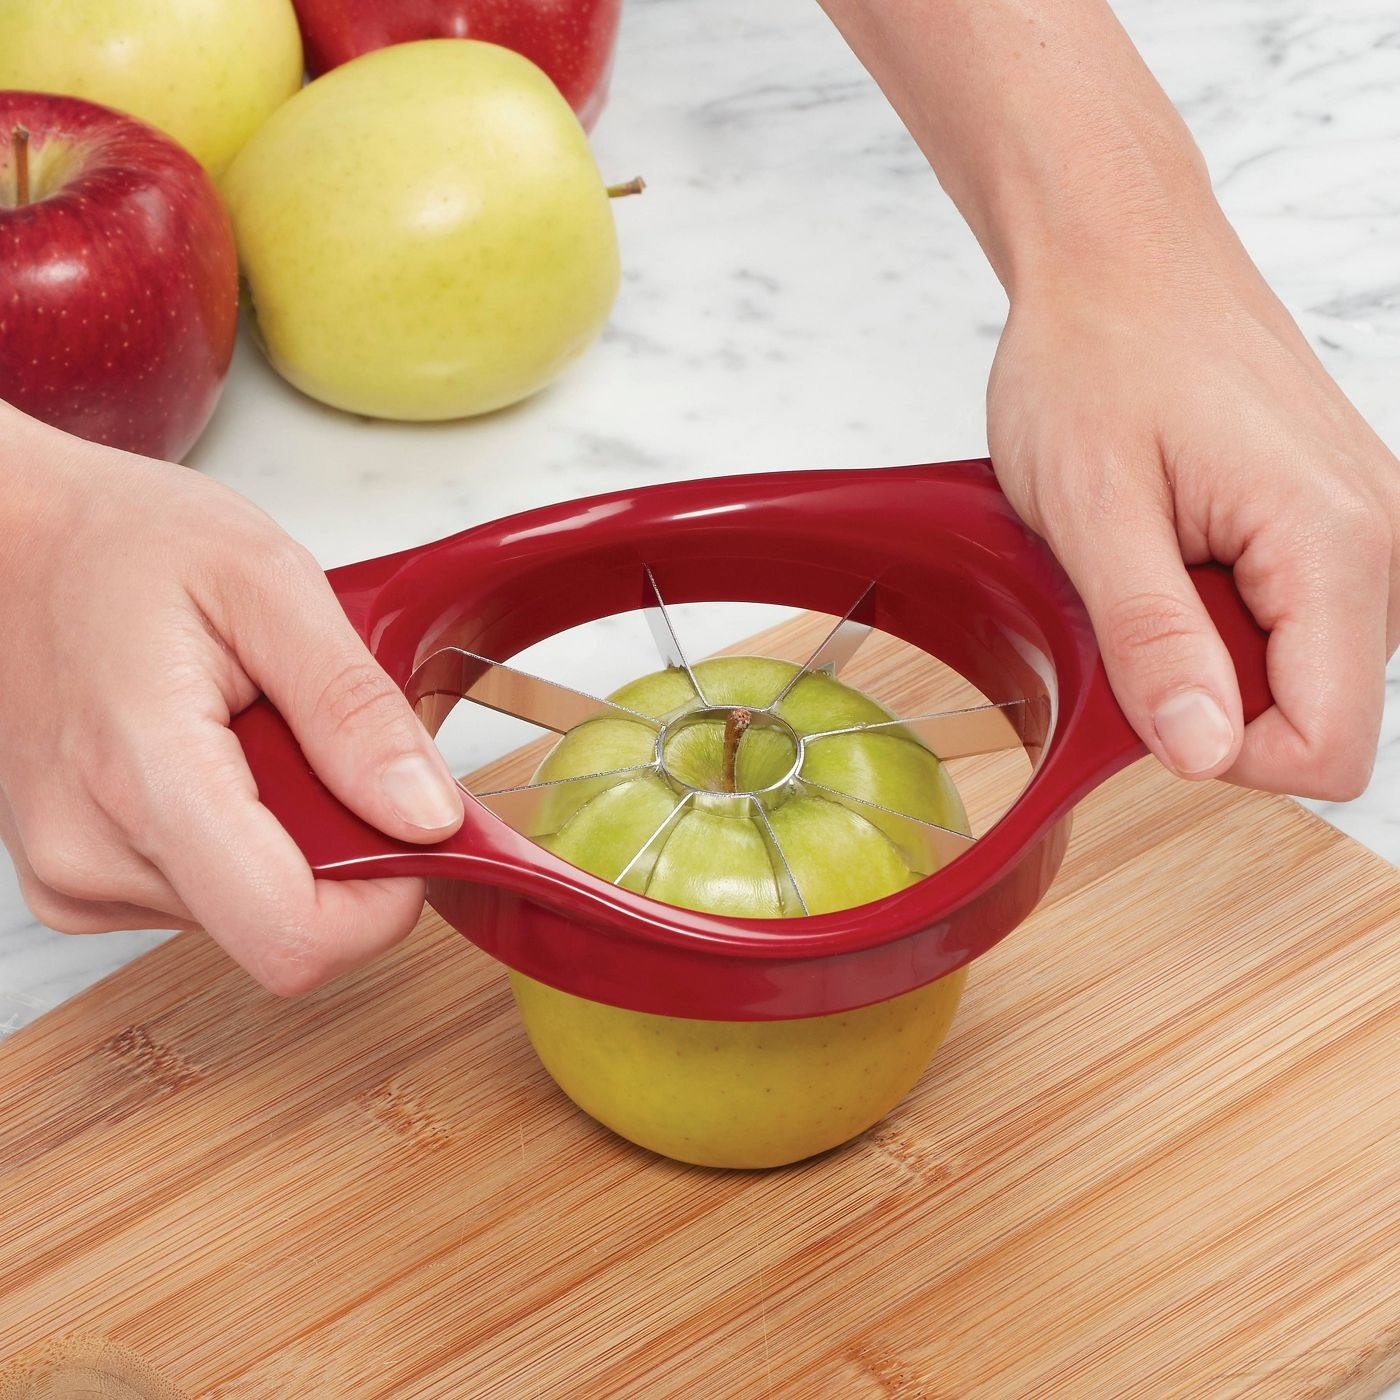 Hands using the tool to slice an apple